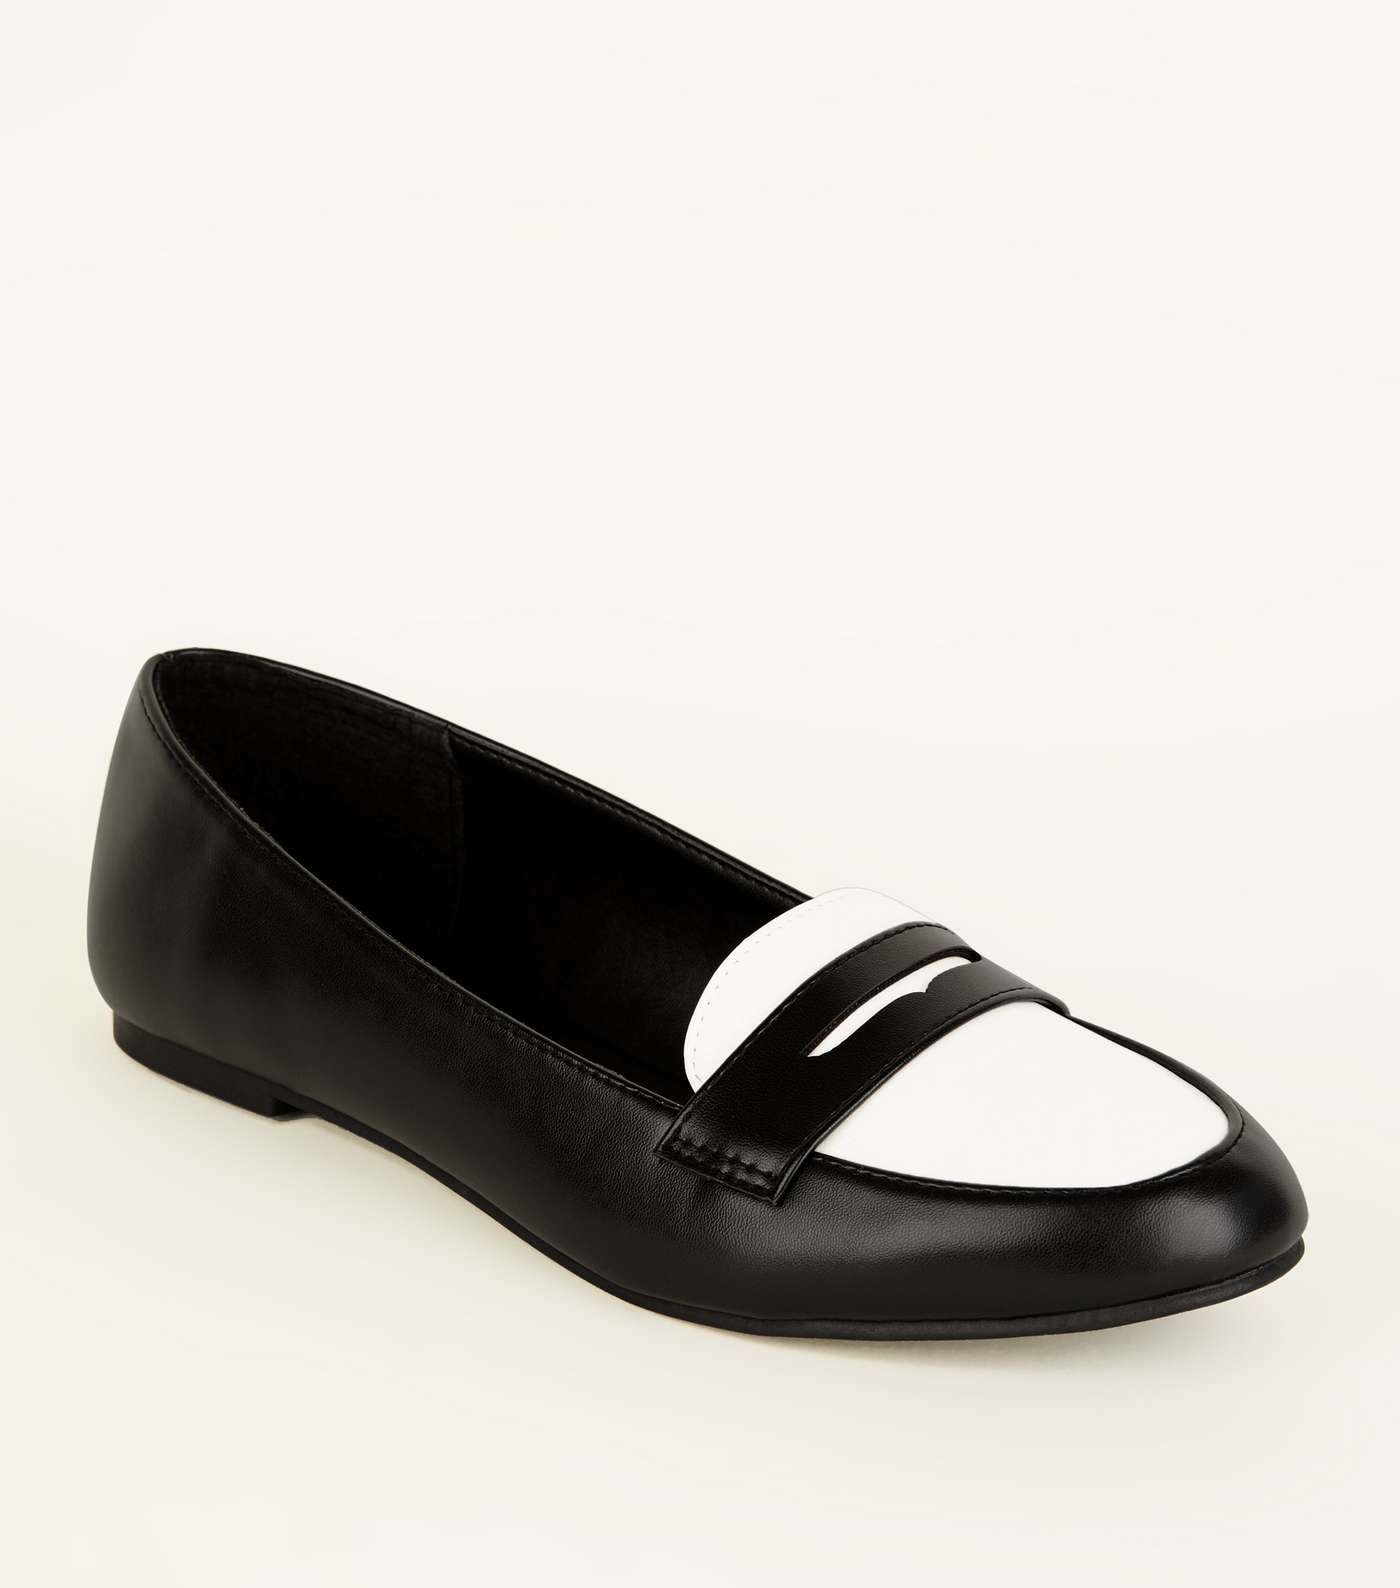 Monochrome Leather-Look Penny Loafers